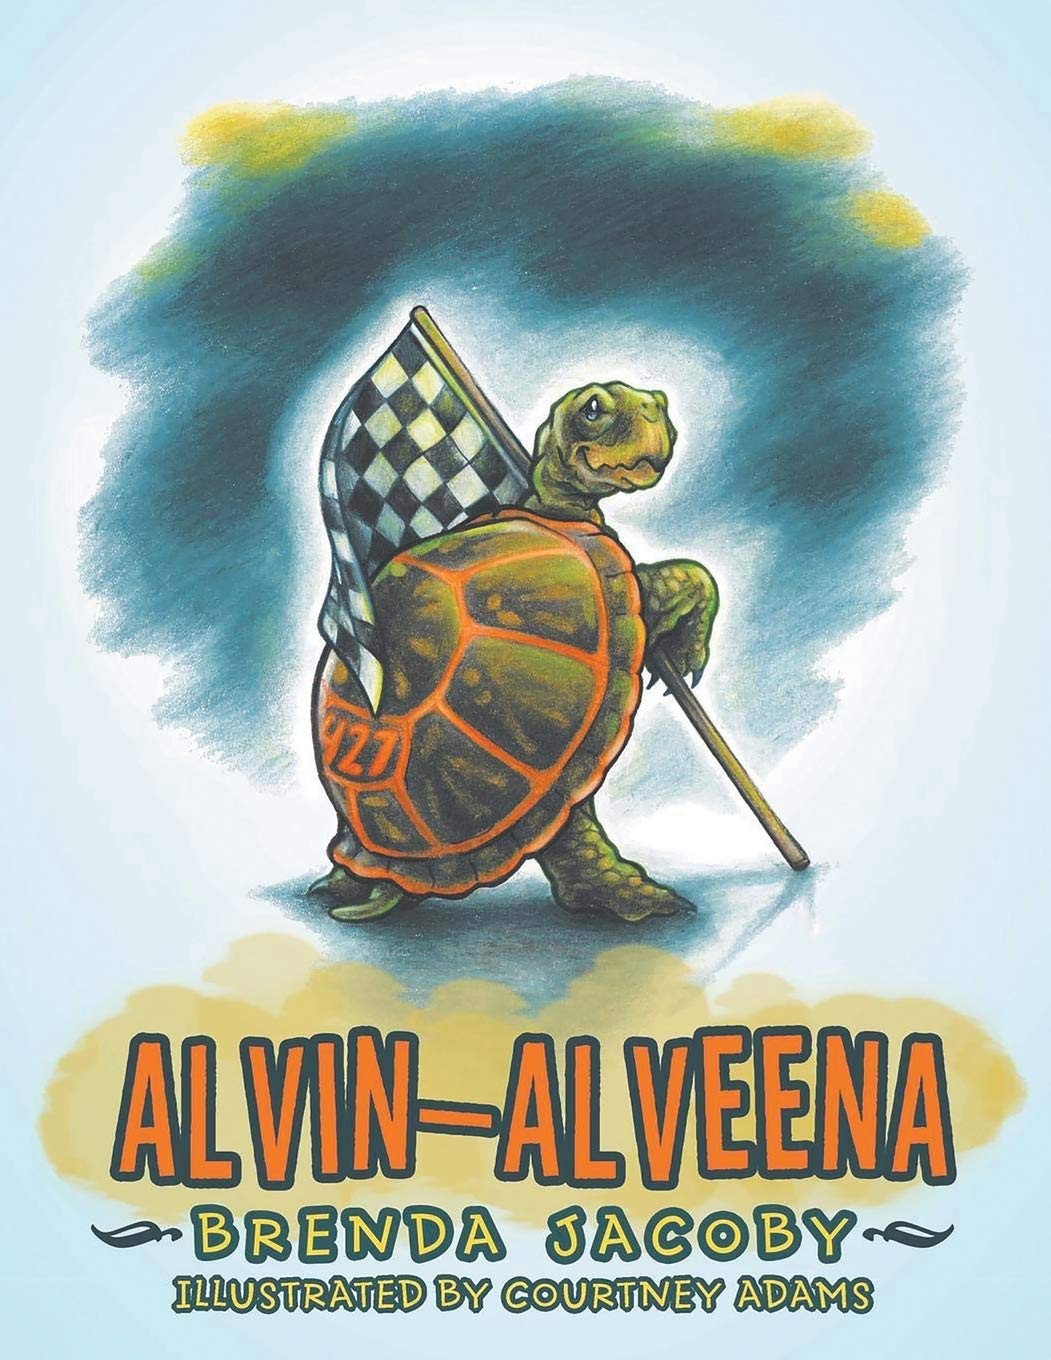 Brenda Jacoby’s Alvin-Alveena Catches The Attention of Author’s Tranquility Press